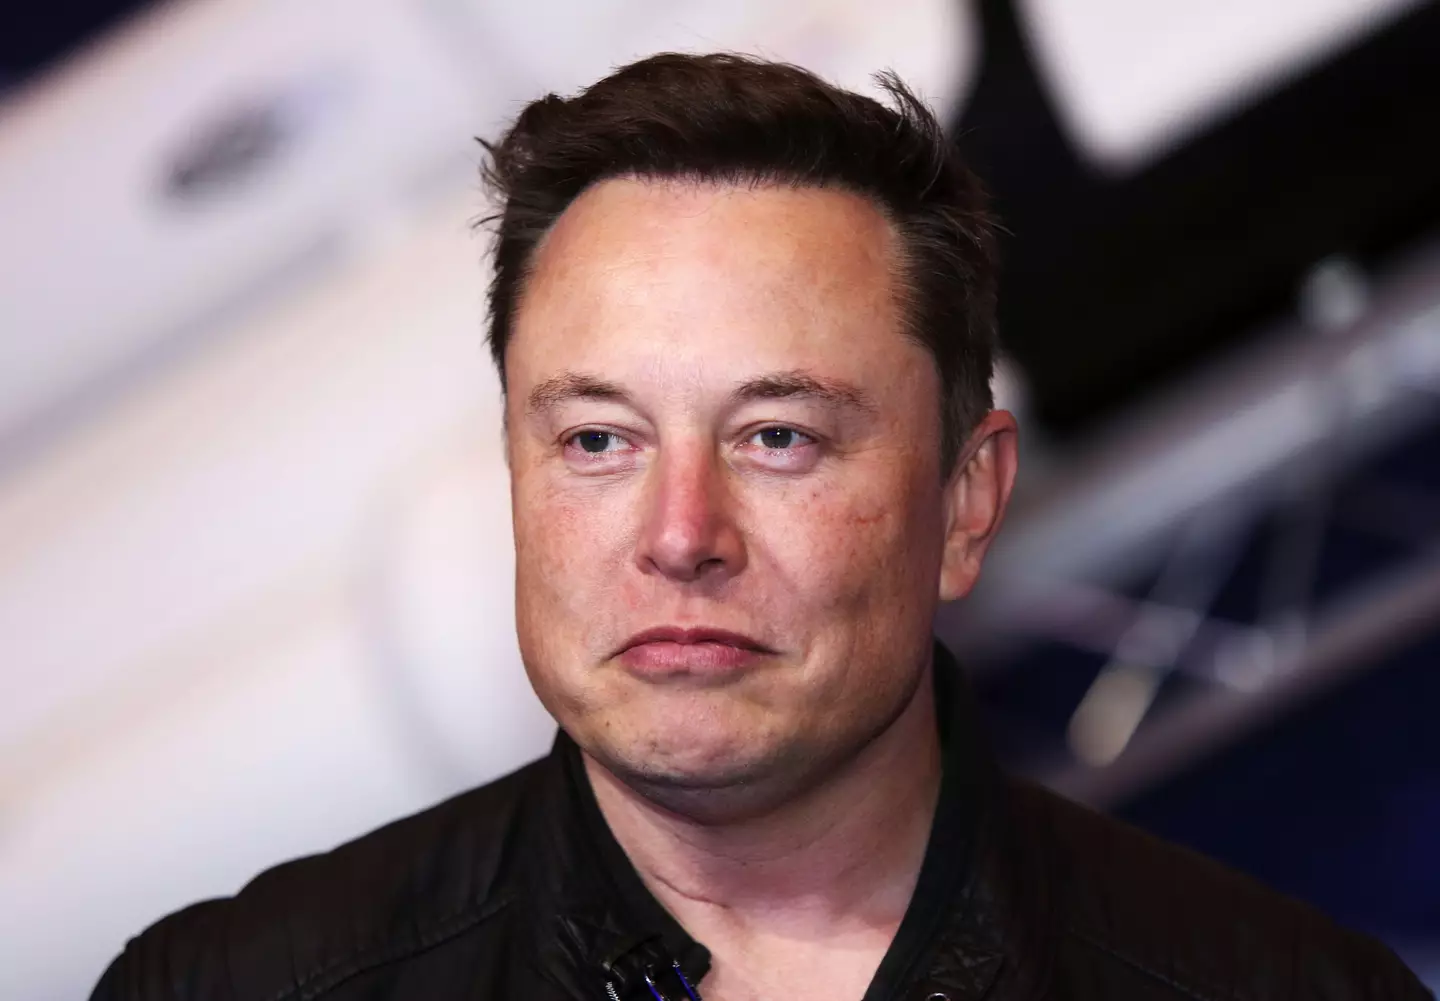 Elon Musk has lost $100bn over the past year.